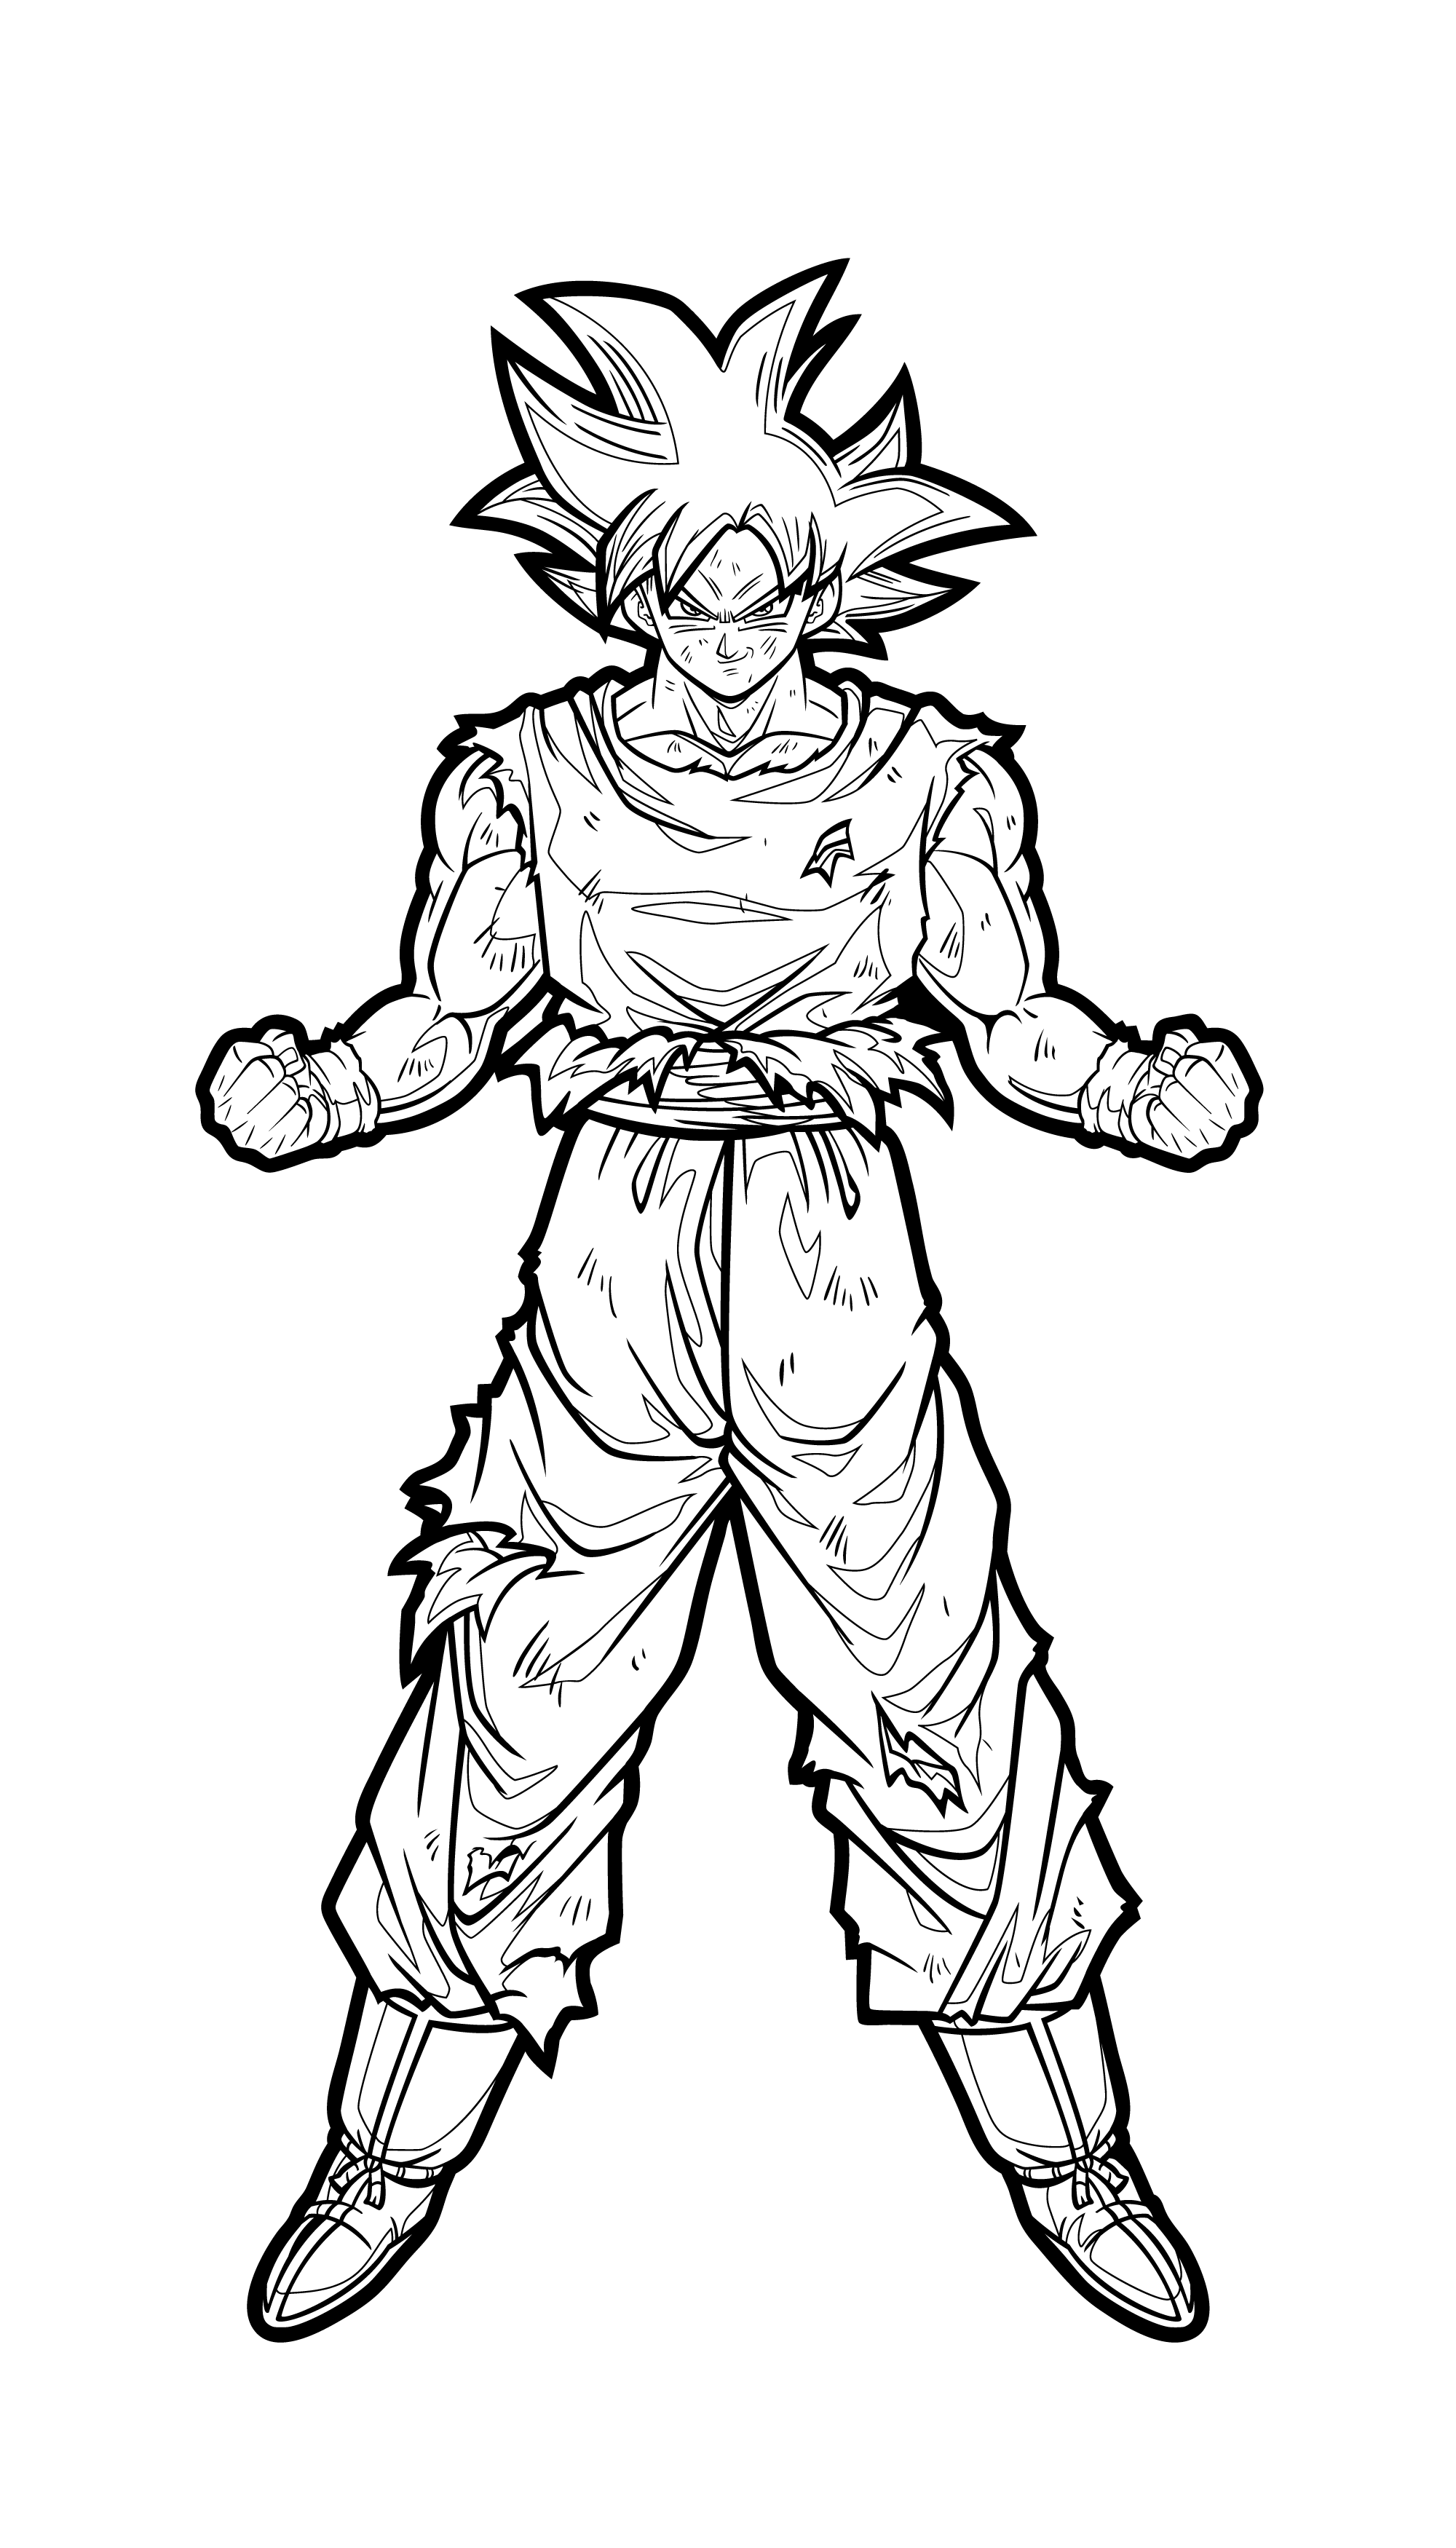 Dragon Ball Coloring Pages Ultra Instinct Kamehameha Coloring Pages